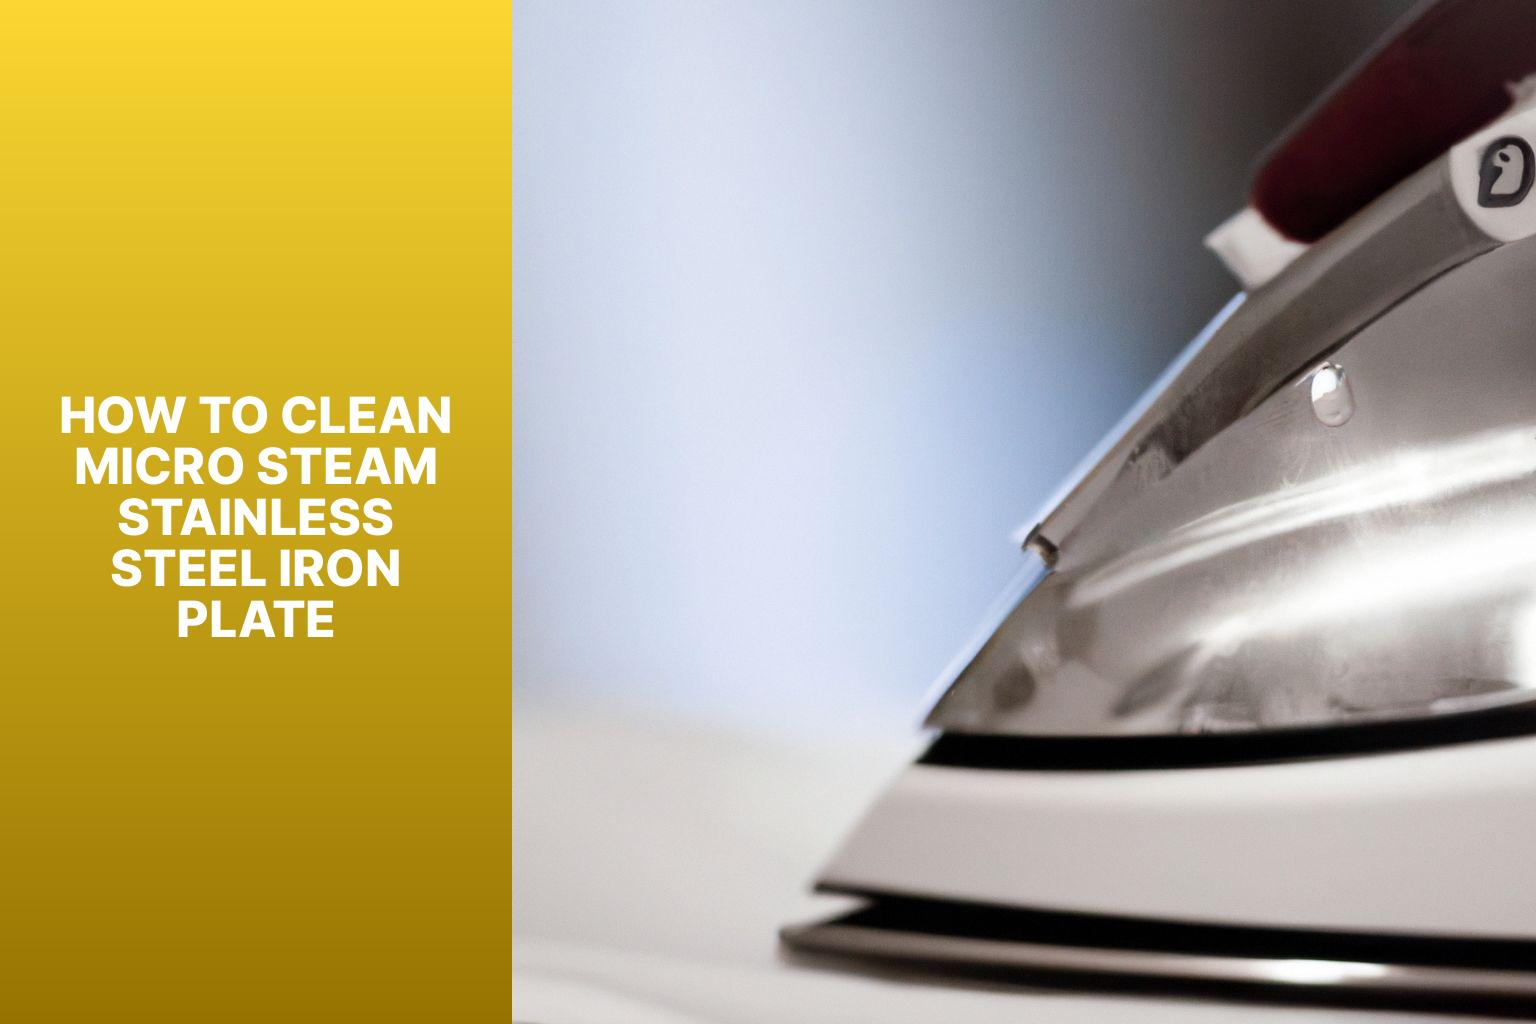 How To Clean Micro Steam Stainless Steel Iron Plate